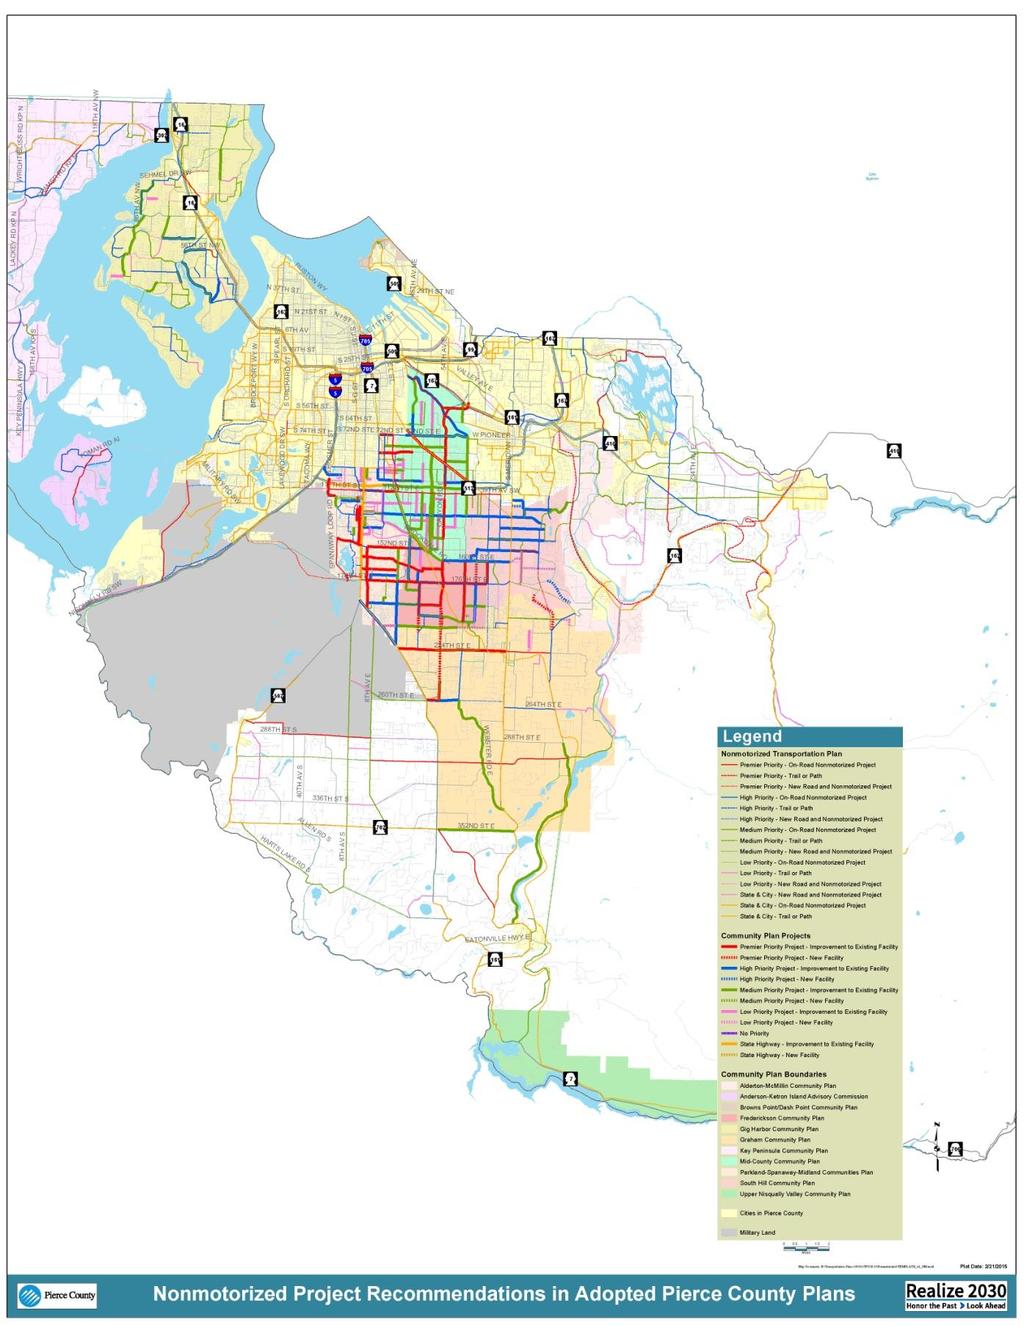 Map 12-19: Nonmotorized Project Recommendations in Adopted County